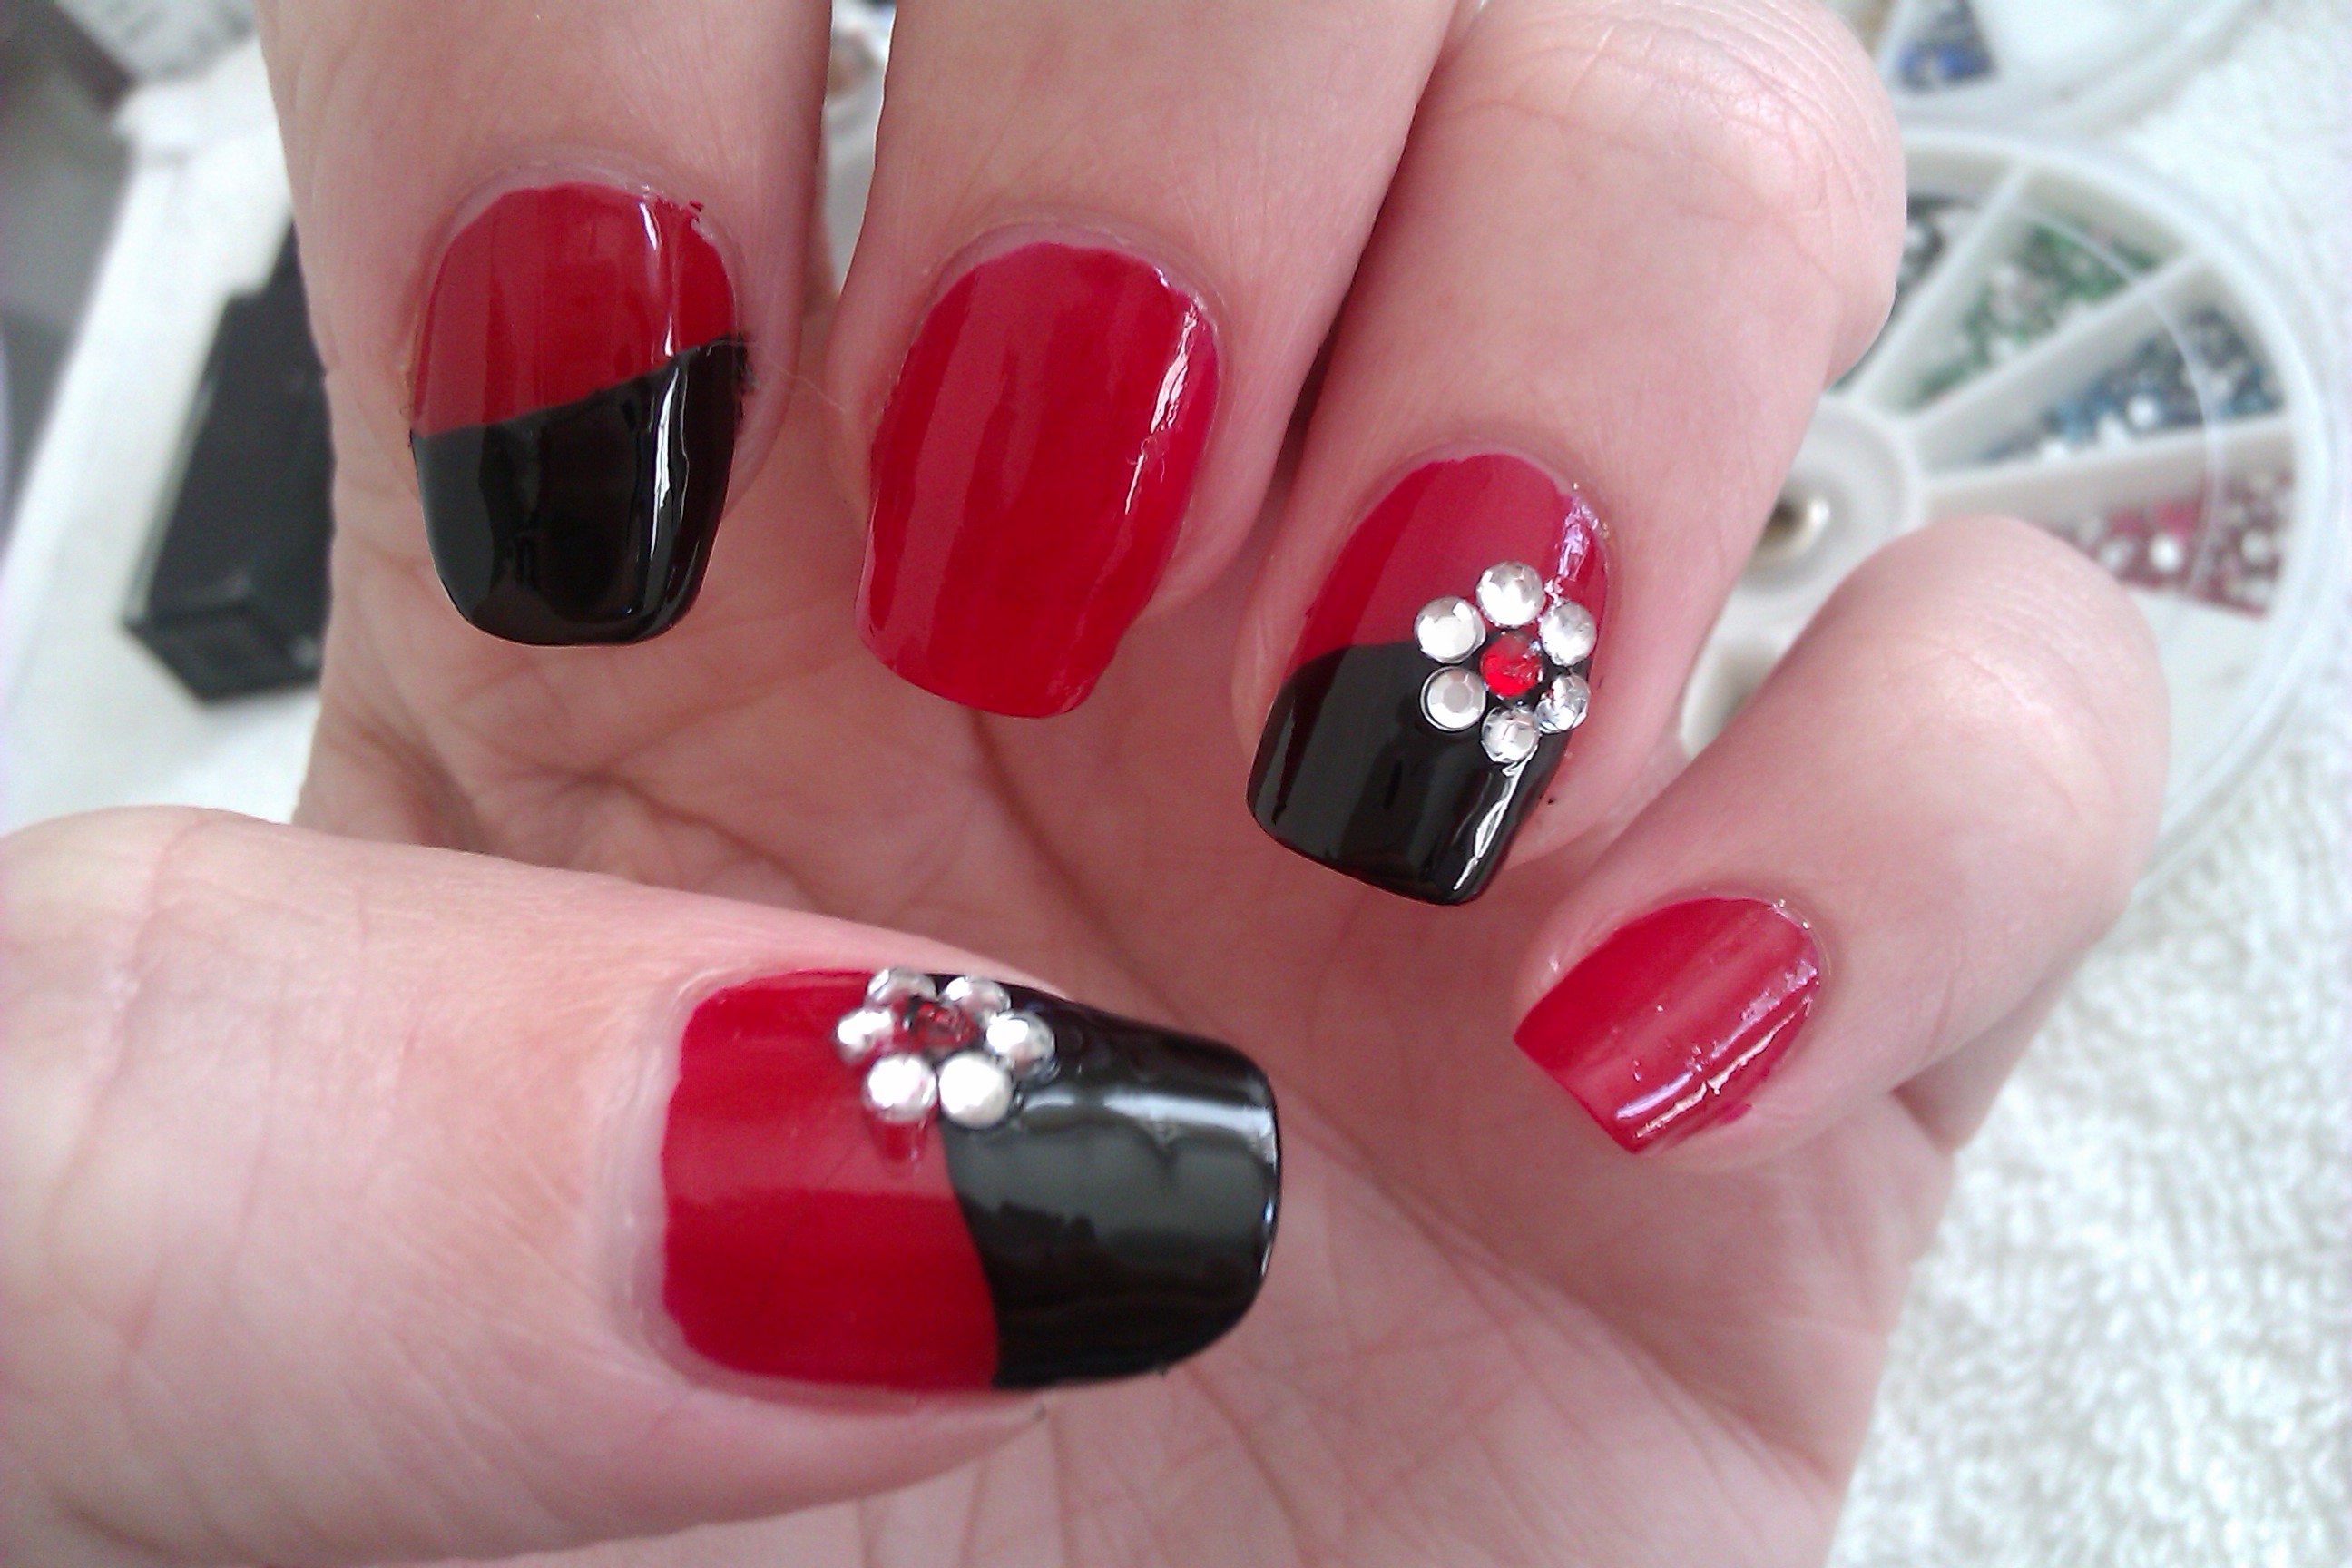 7. Minimalist Red Nail Art for a Chic Look - wide 8